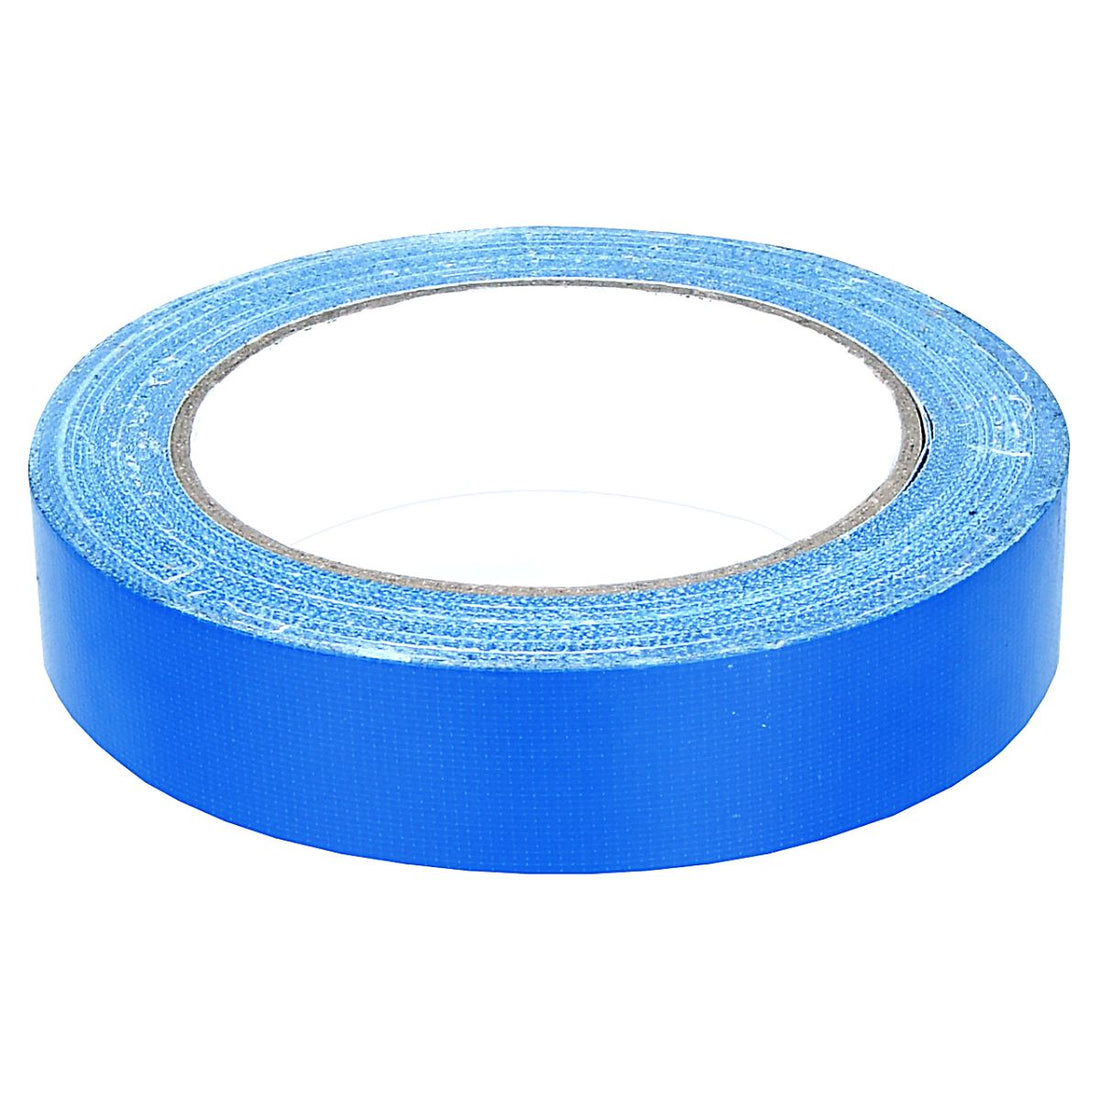 cloth tape by cumberland